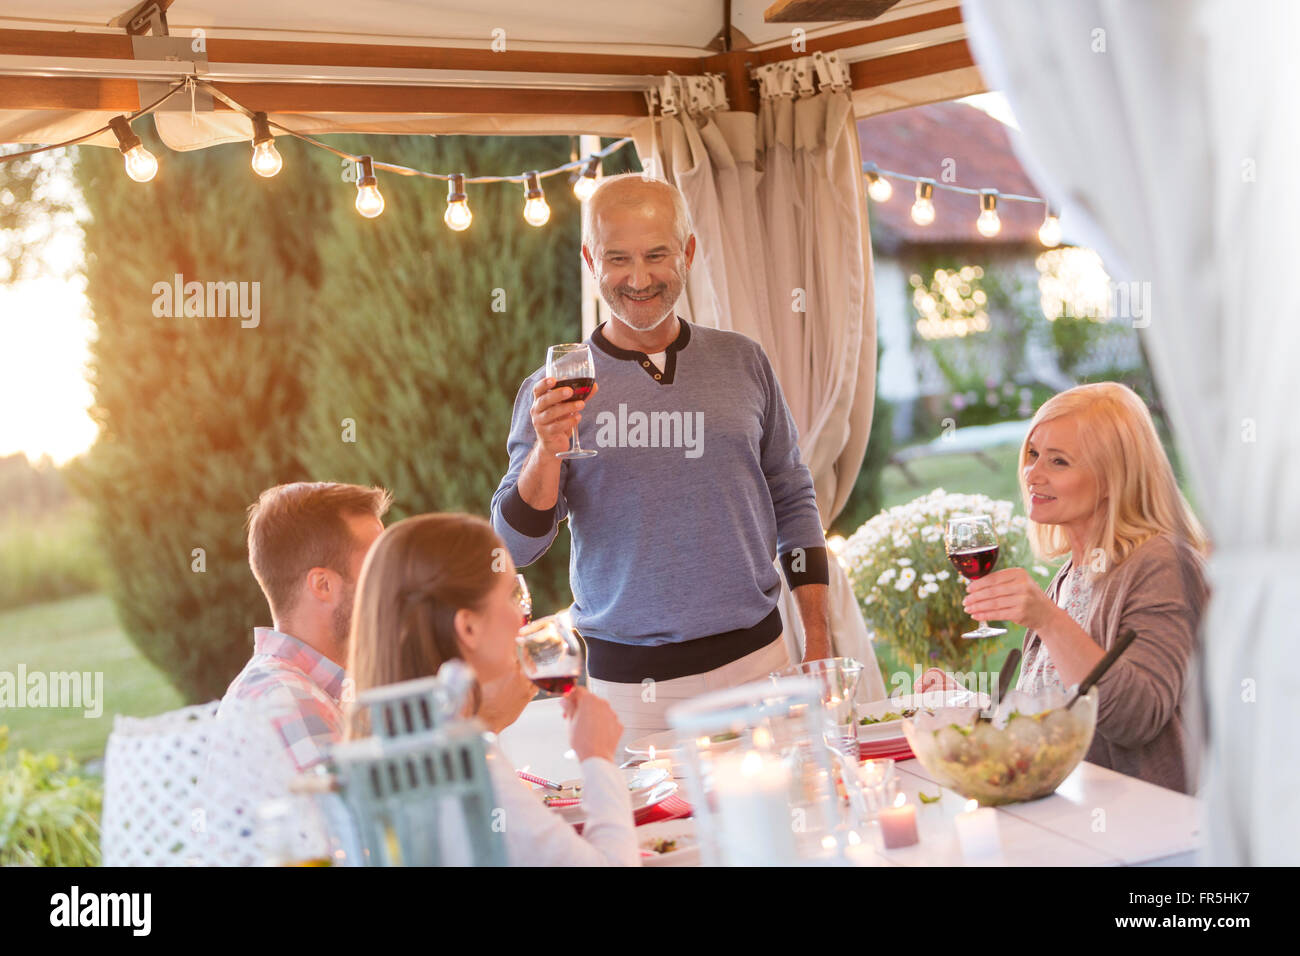 Senior man toasting family with red wine at patio table Stock Photo